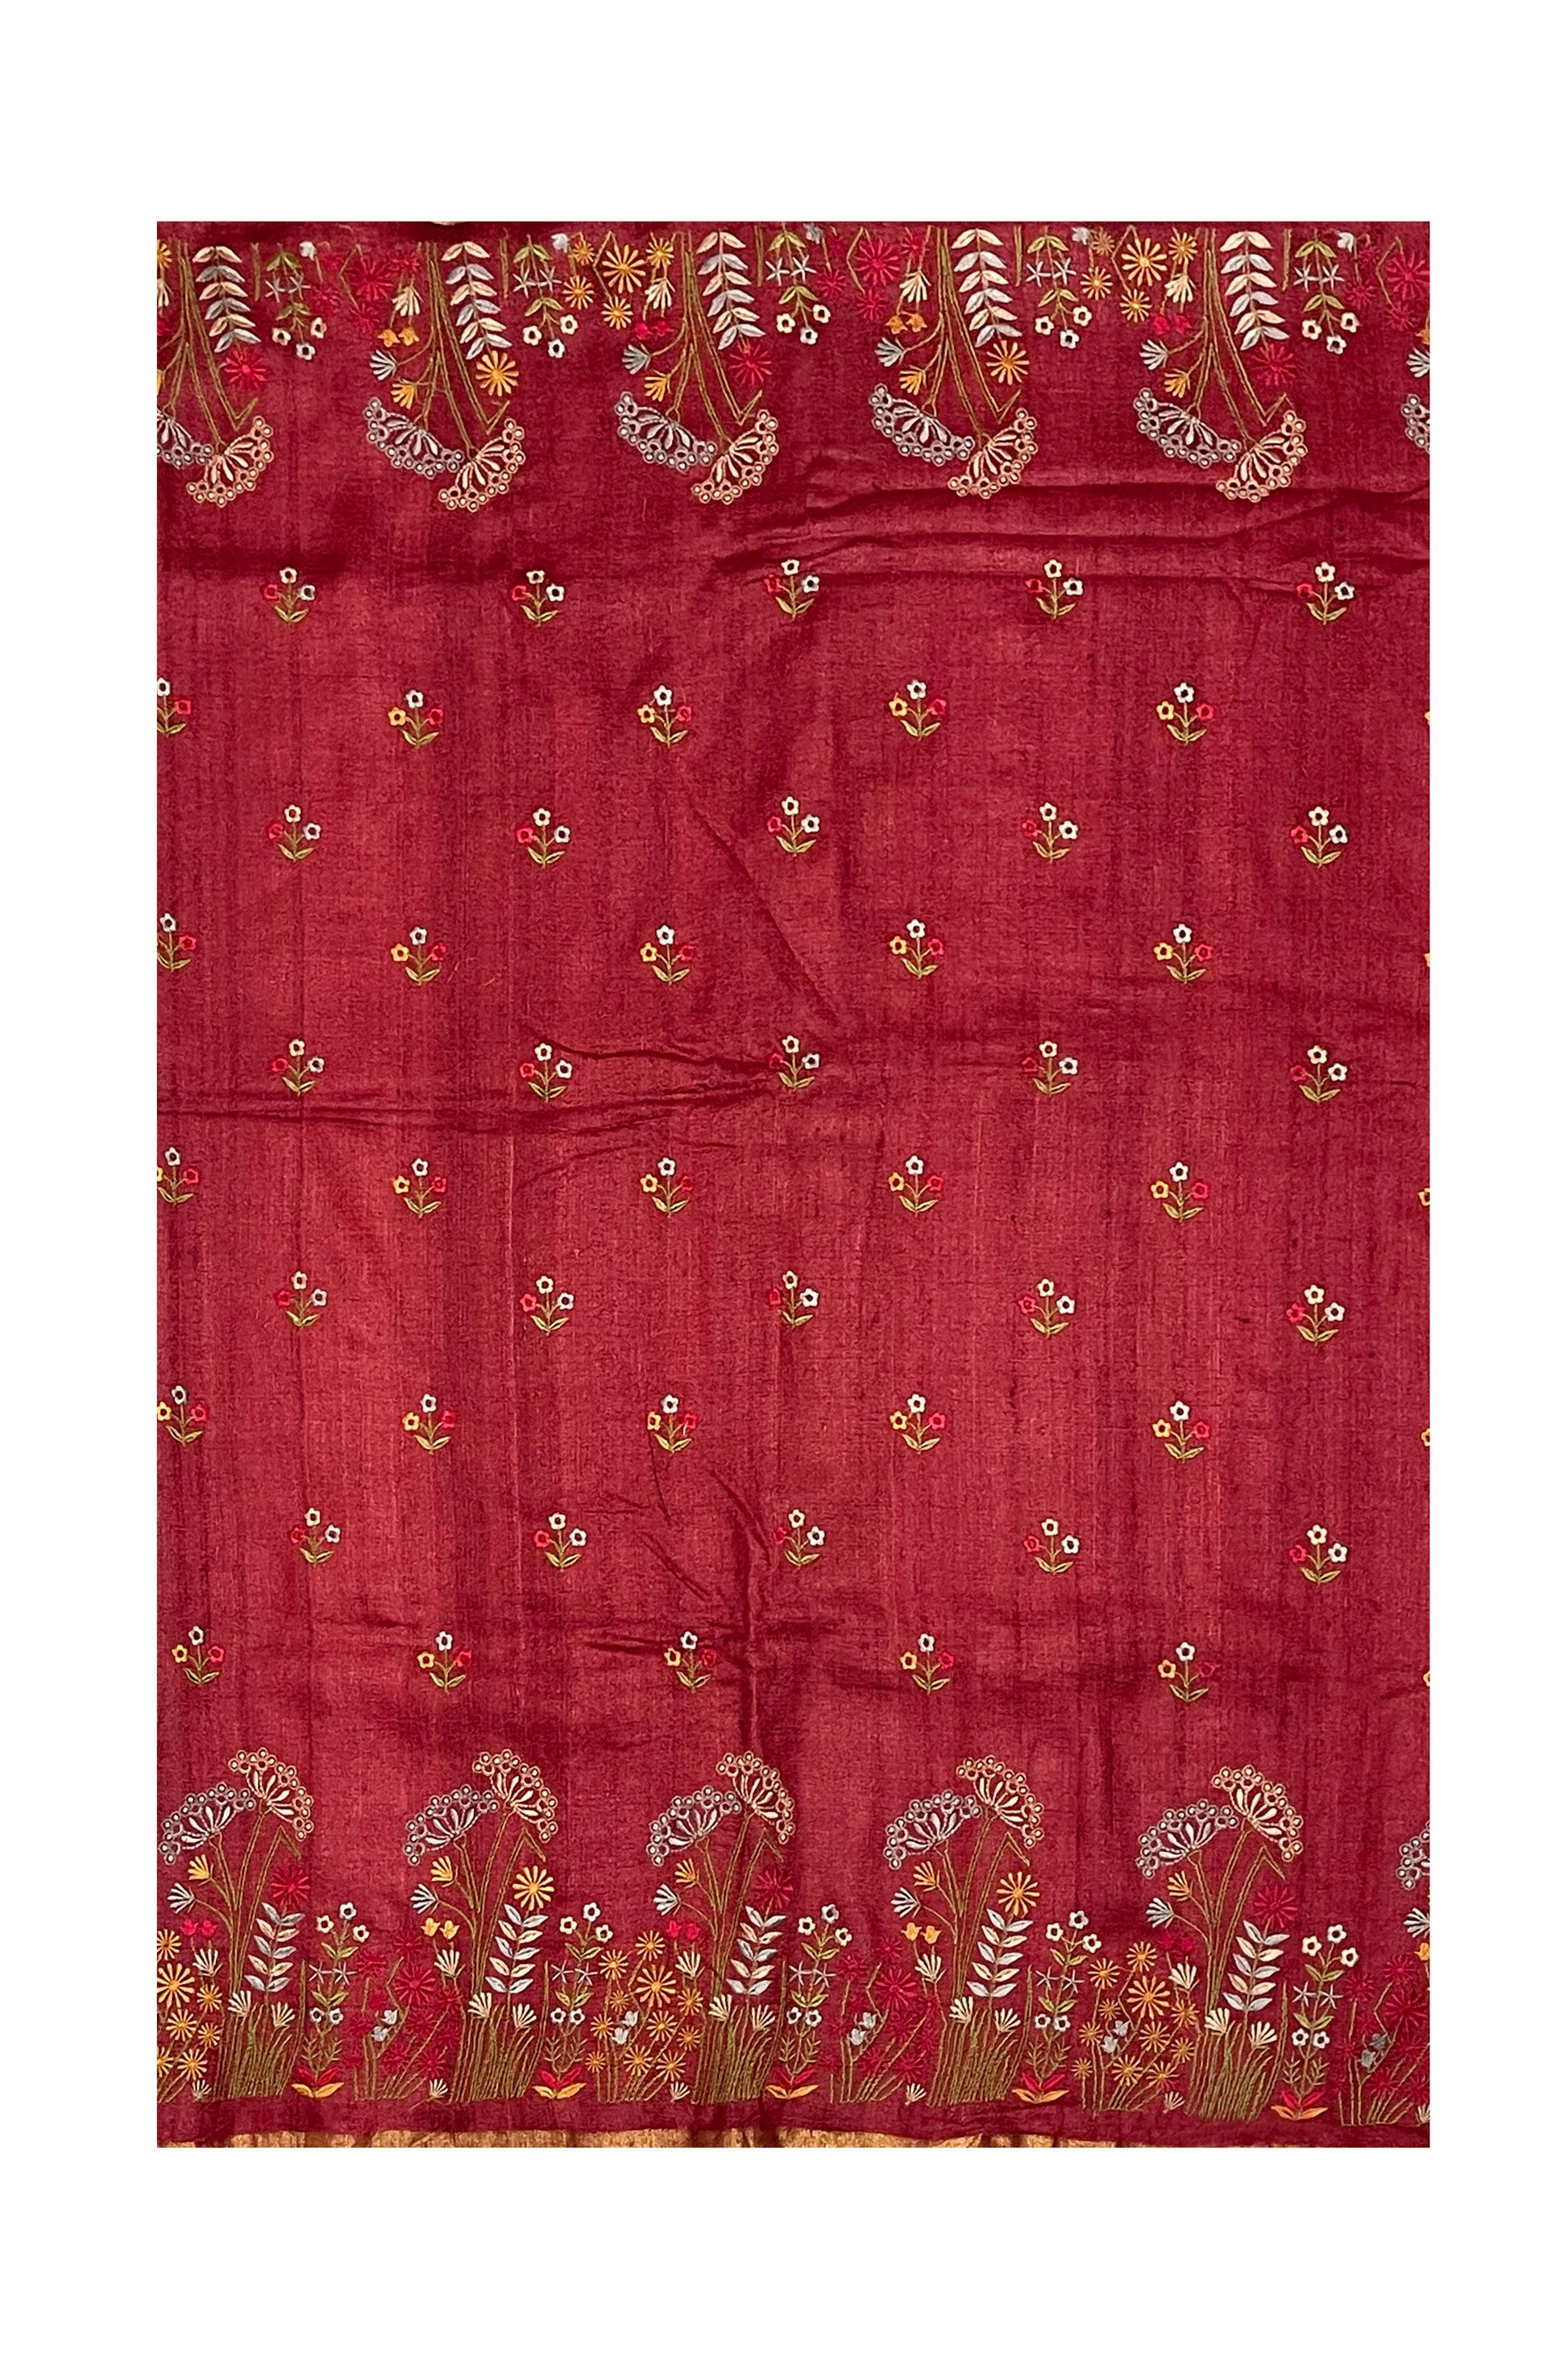 Floral Tussar Embroidered in red